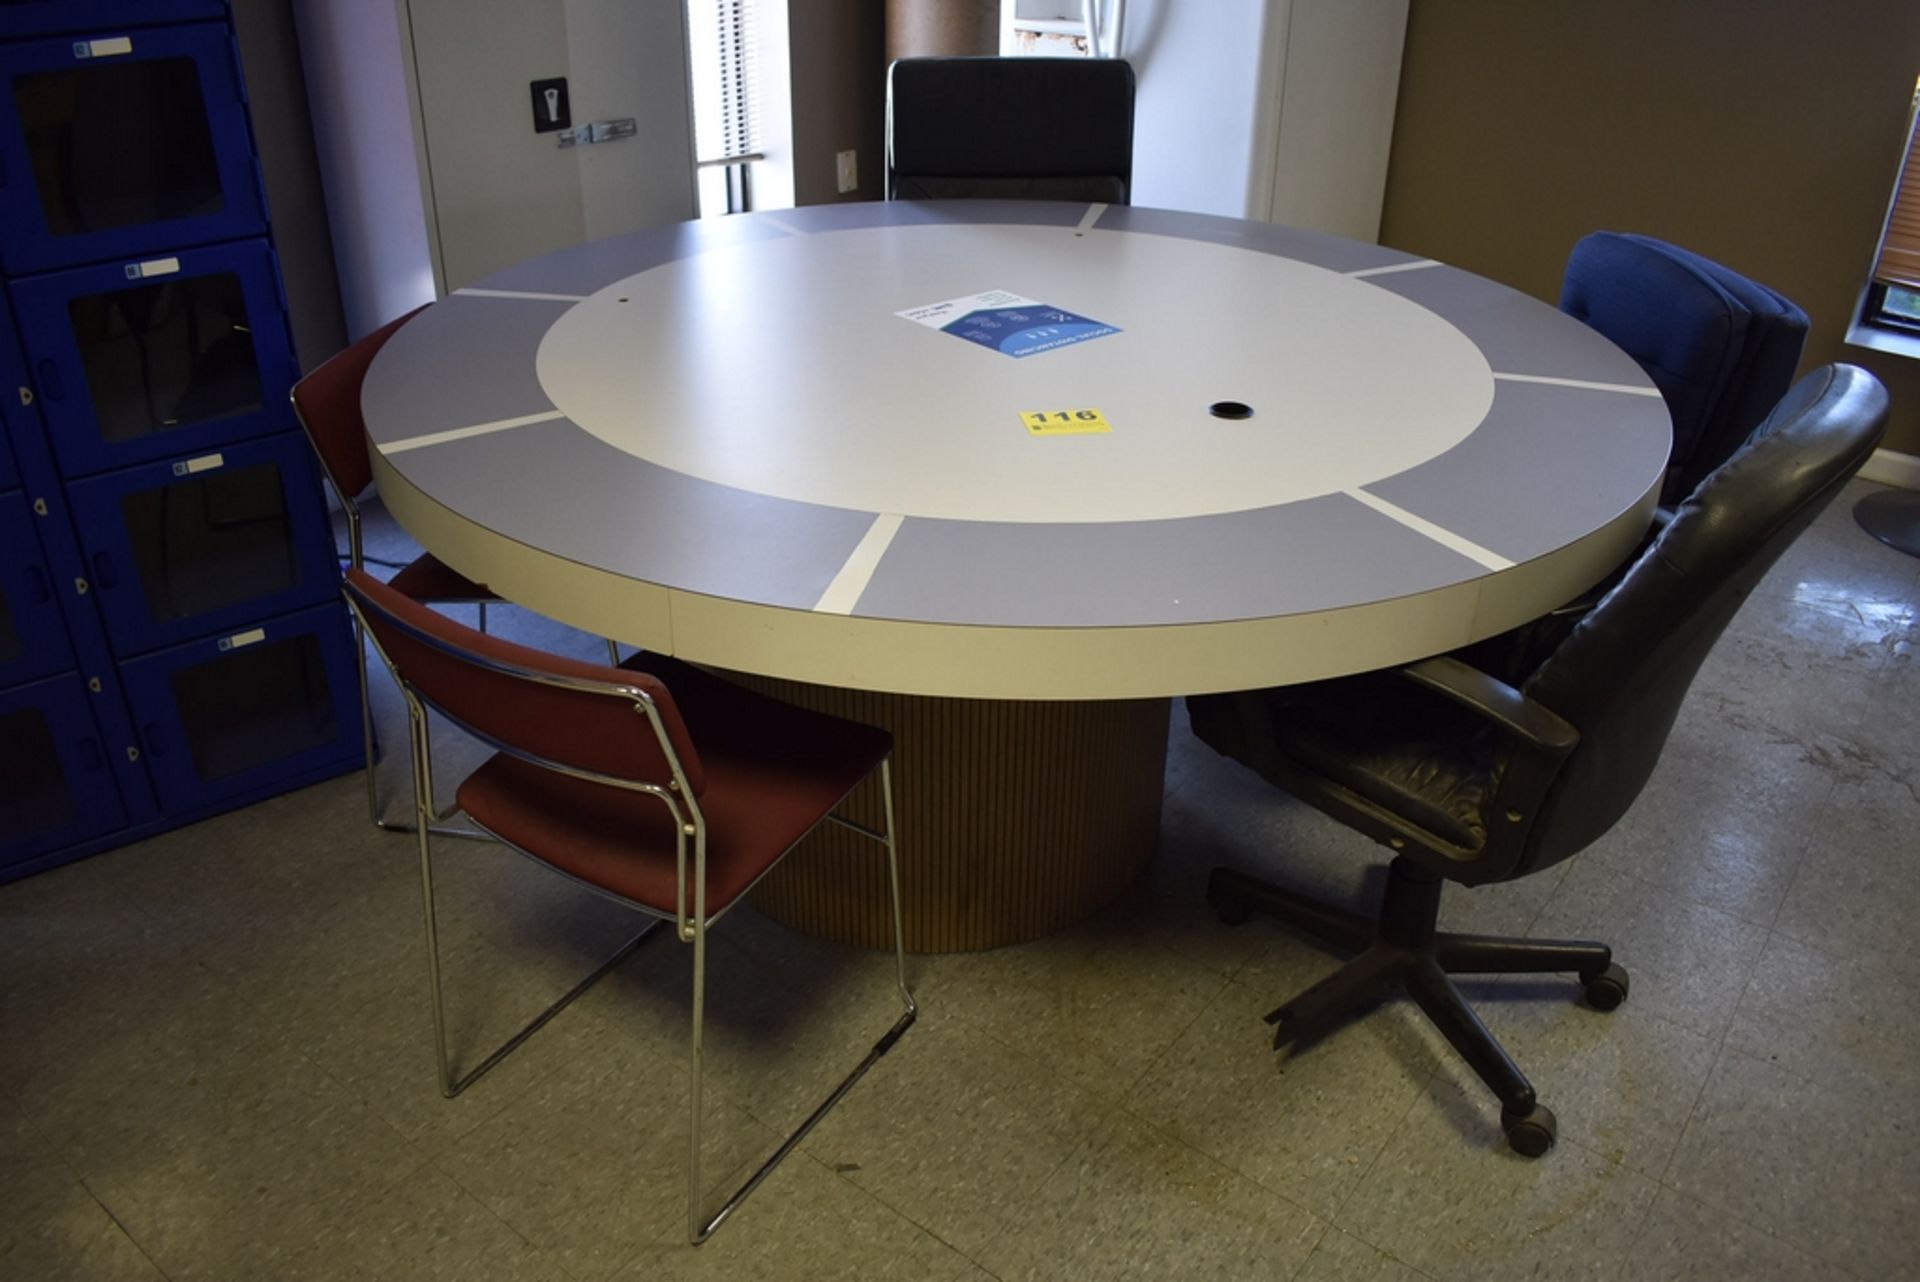 6' ROUND CAFETERIA TABLE WITH ASSORTED CHAIRS